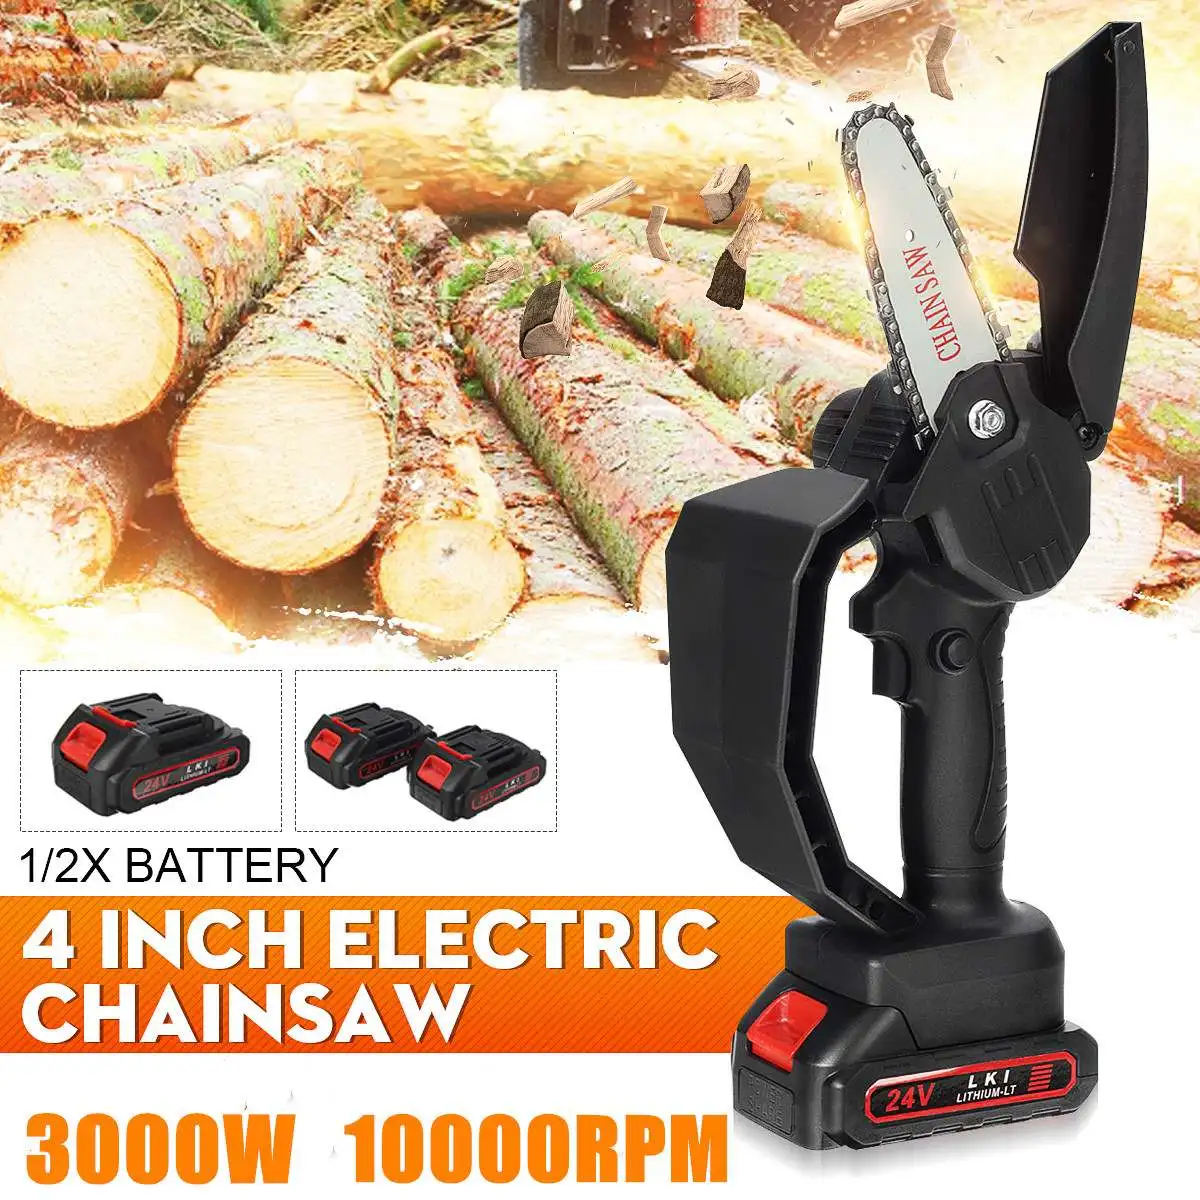 

4 Inch 3000W Electric Chain Saw Cordless Pruning ChainSaw Garden Tree Logging Woodworking Power Tool for Makiita 18V Battery